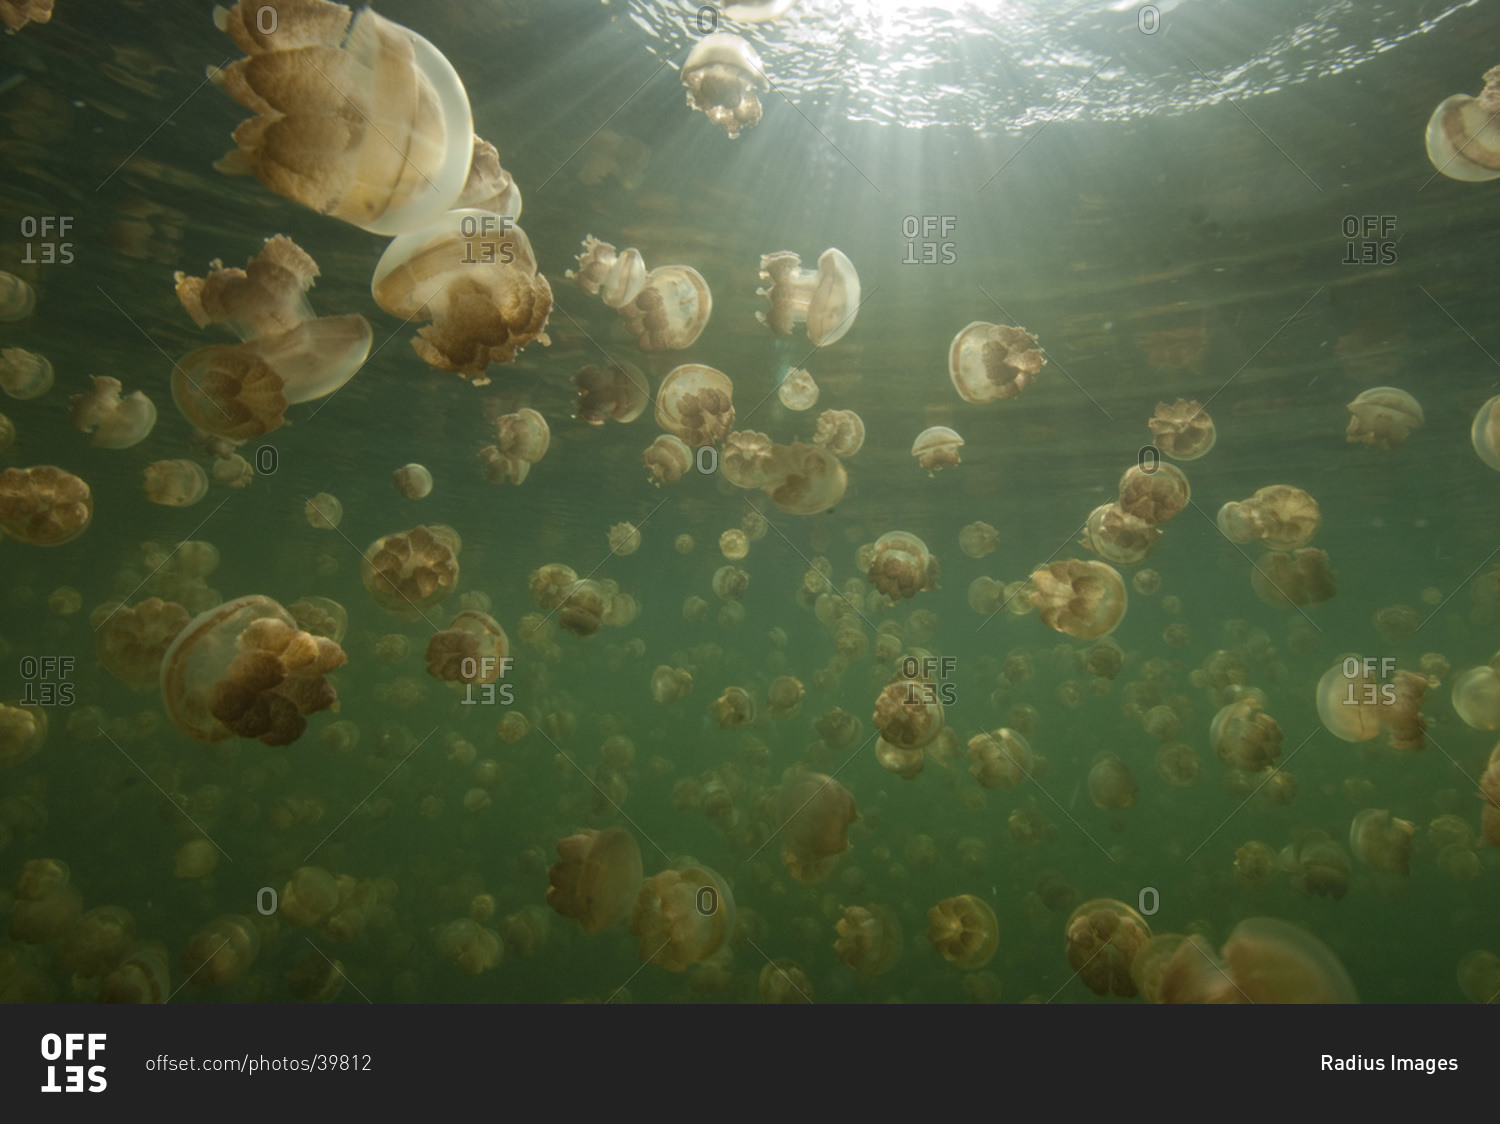 Large Group of Stingless Jellyfish (Ornate Cassiopeia) Underwater with Rays of Sunlight Shining through Water, Palau, Micronesia